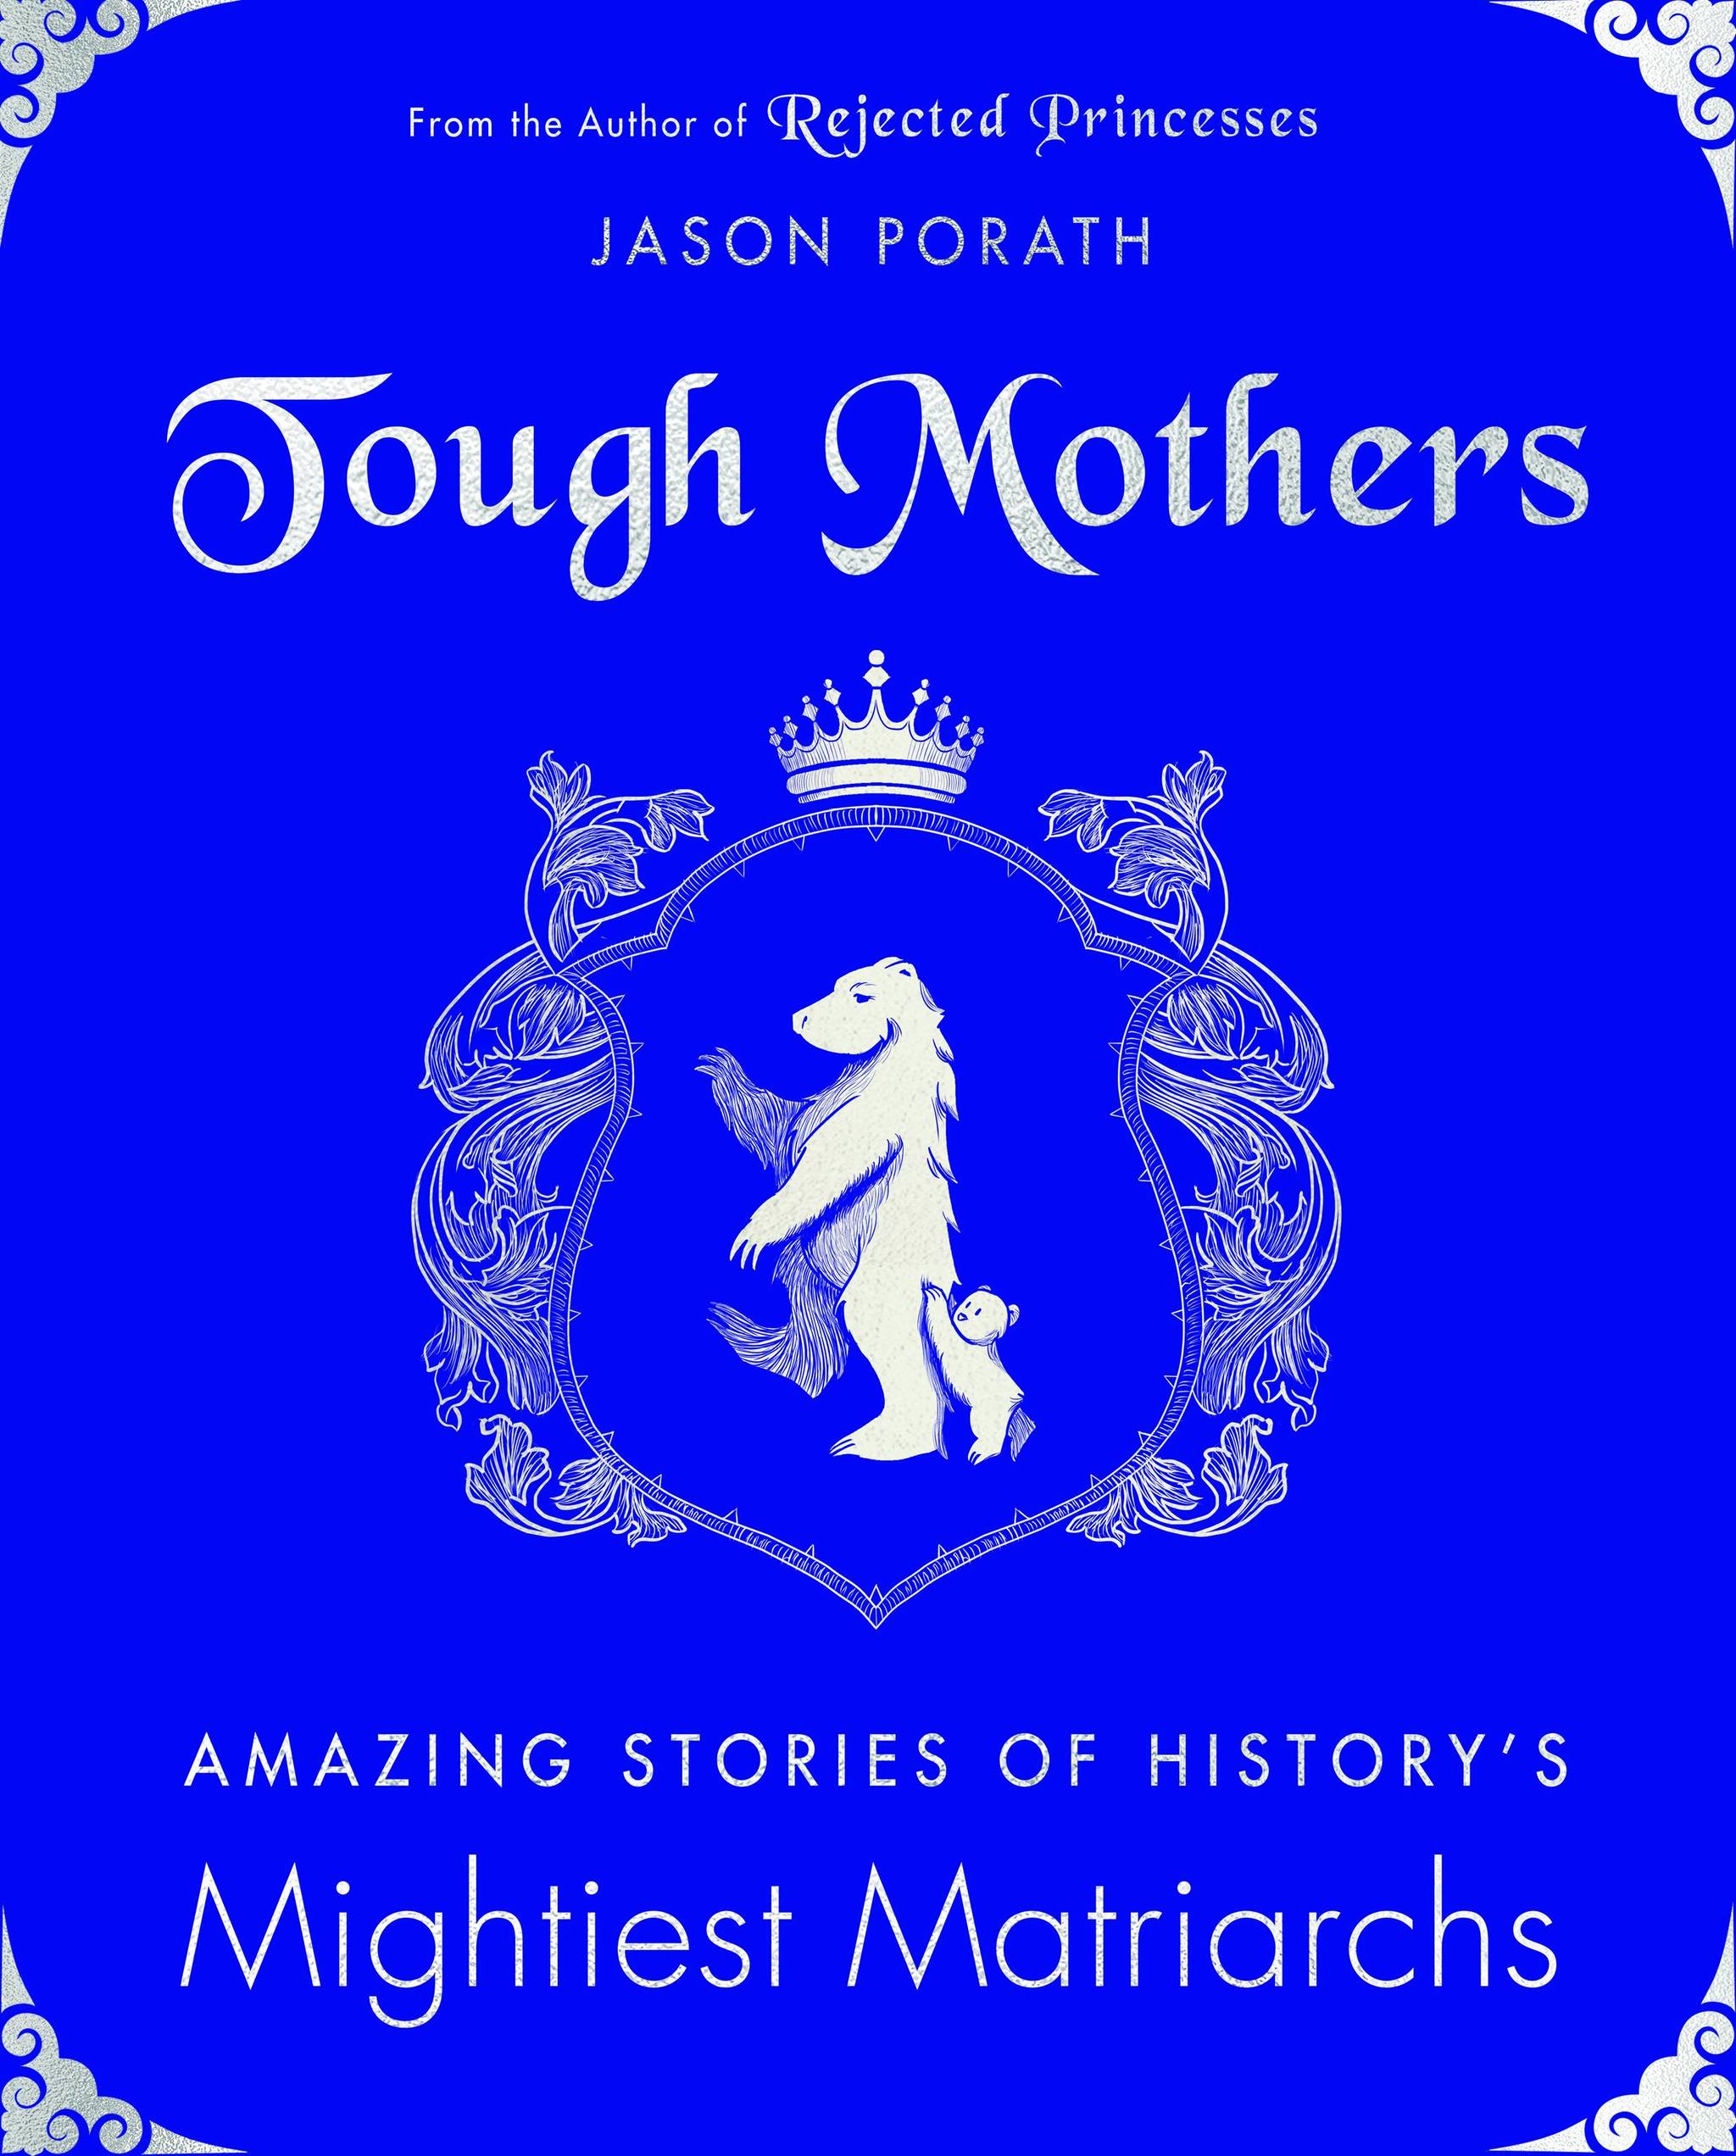 The Bookworm Sez: ‘Tough Mothers’: The title says it all